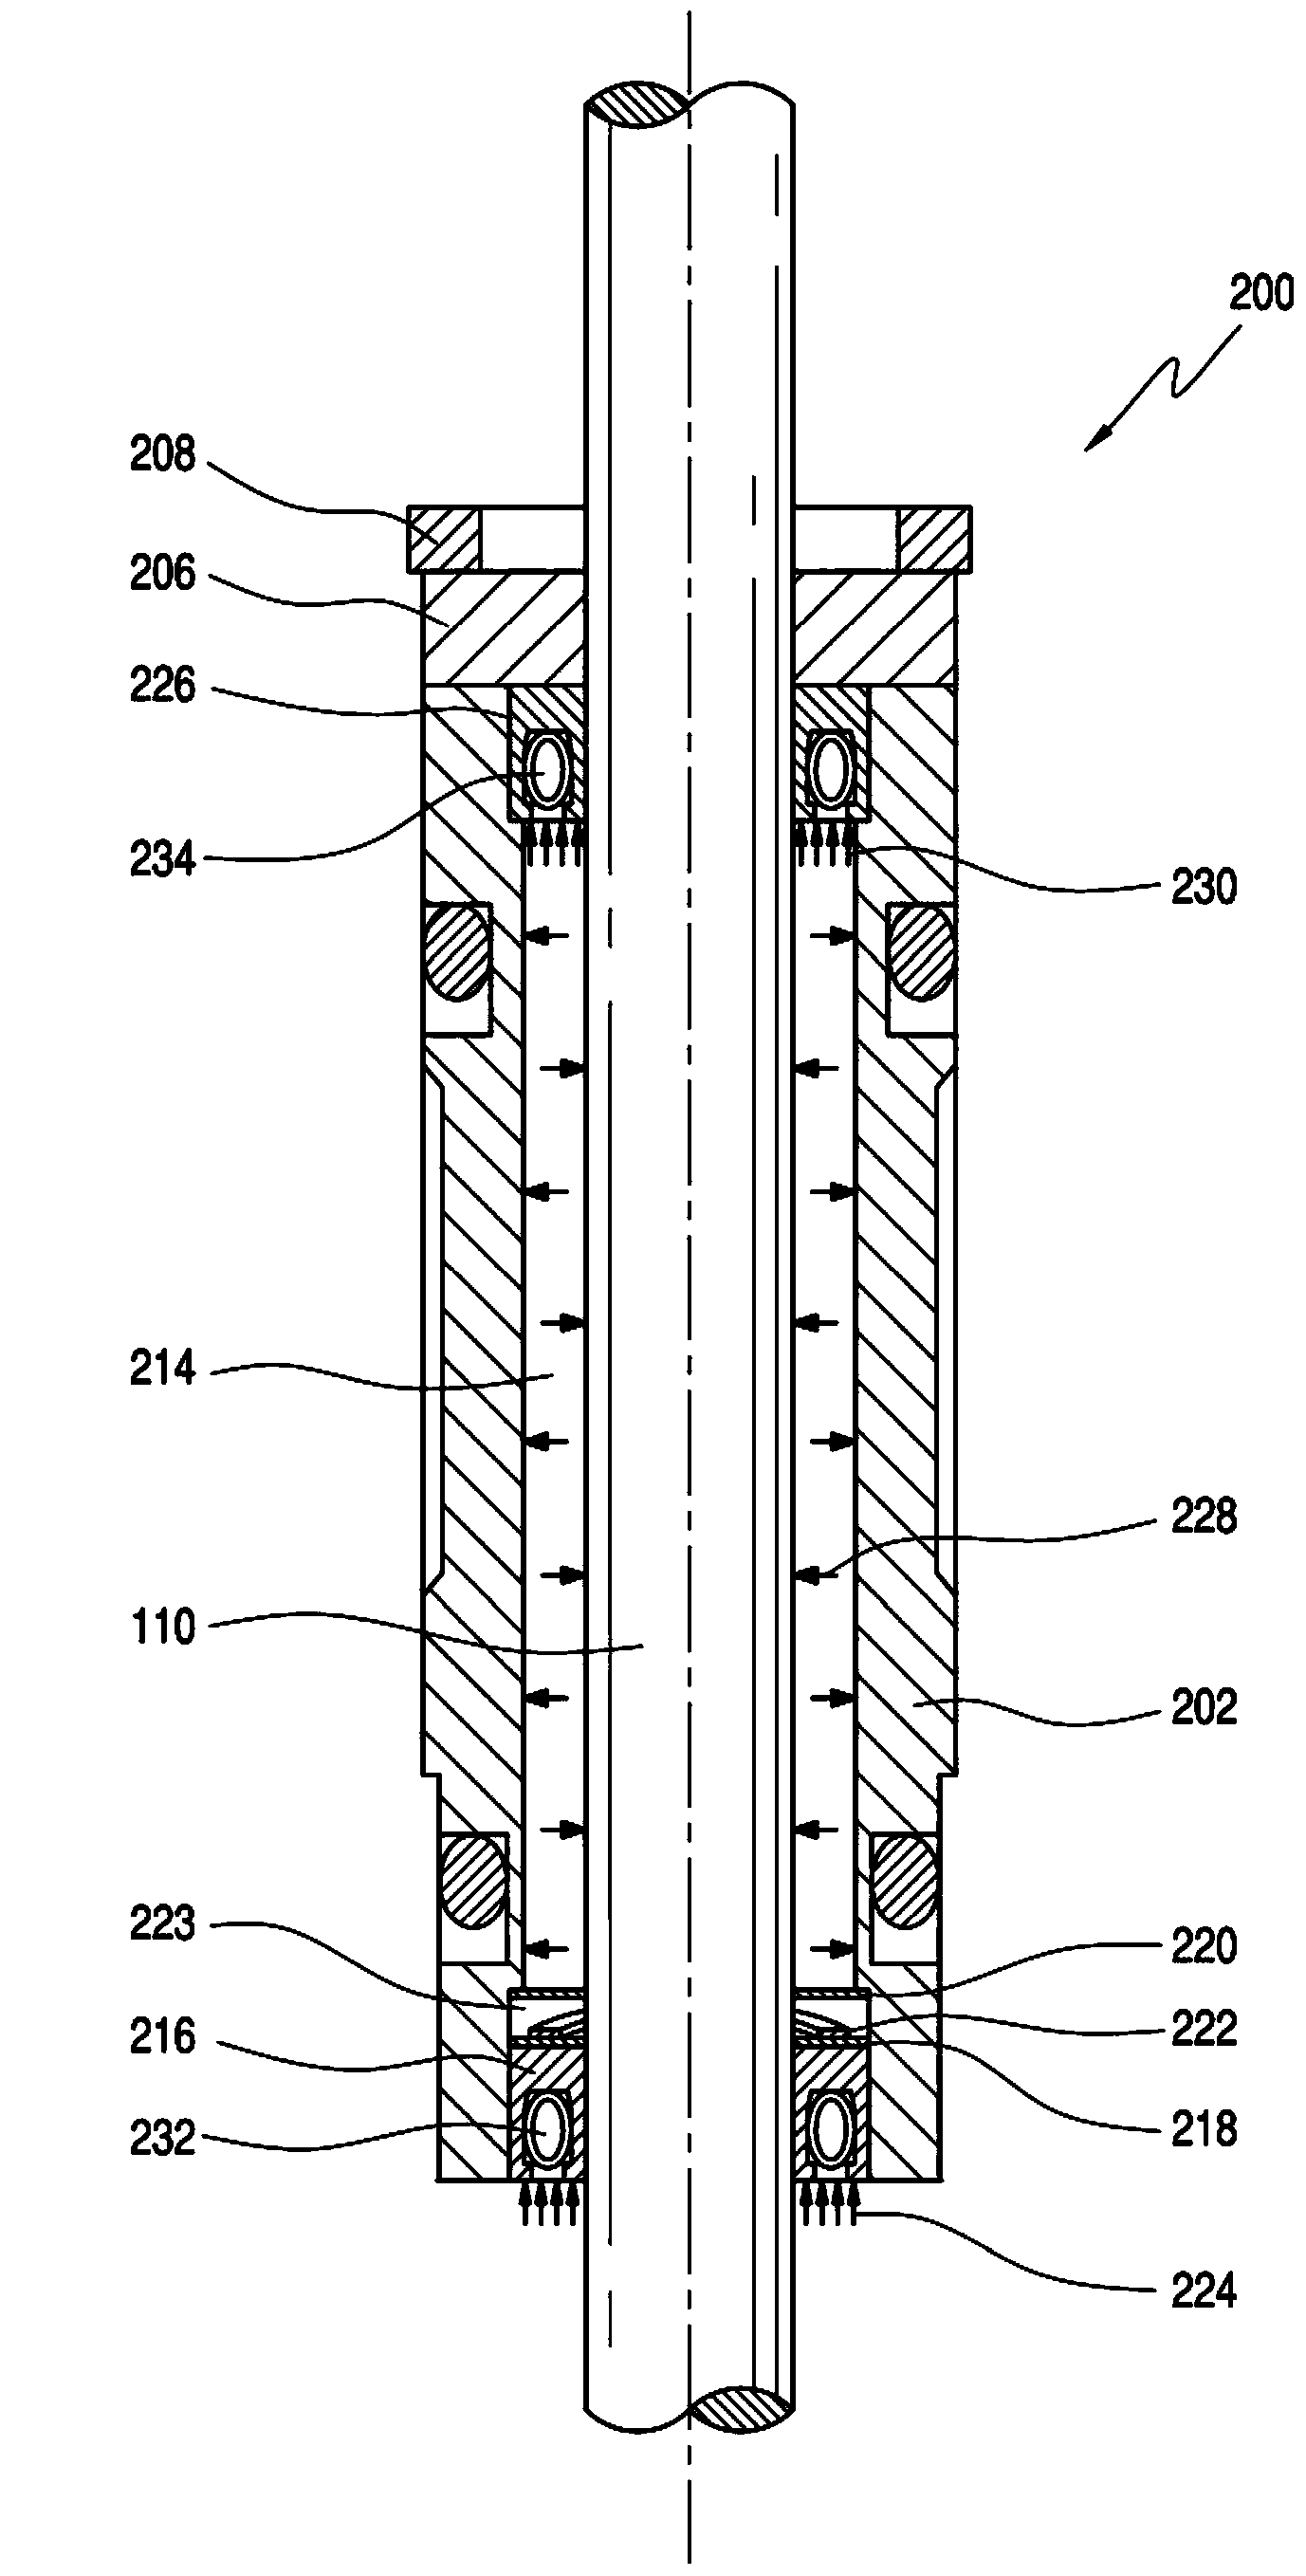 Hydraulic seal assembly for a thermoplastic material dispensing valve assembly